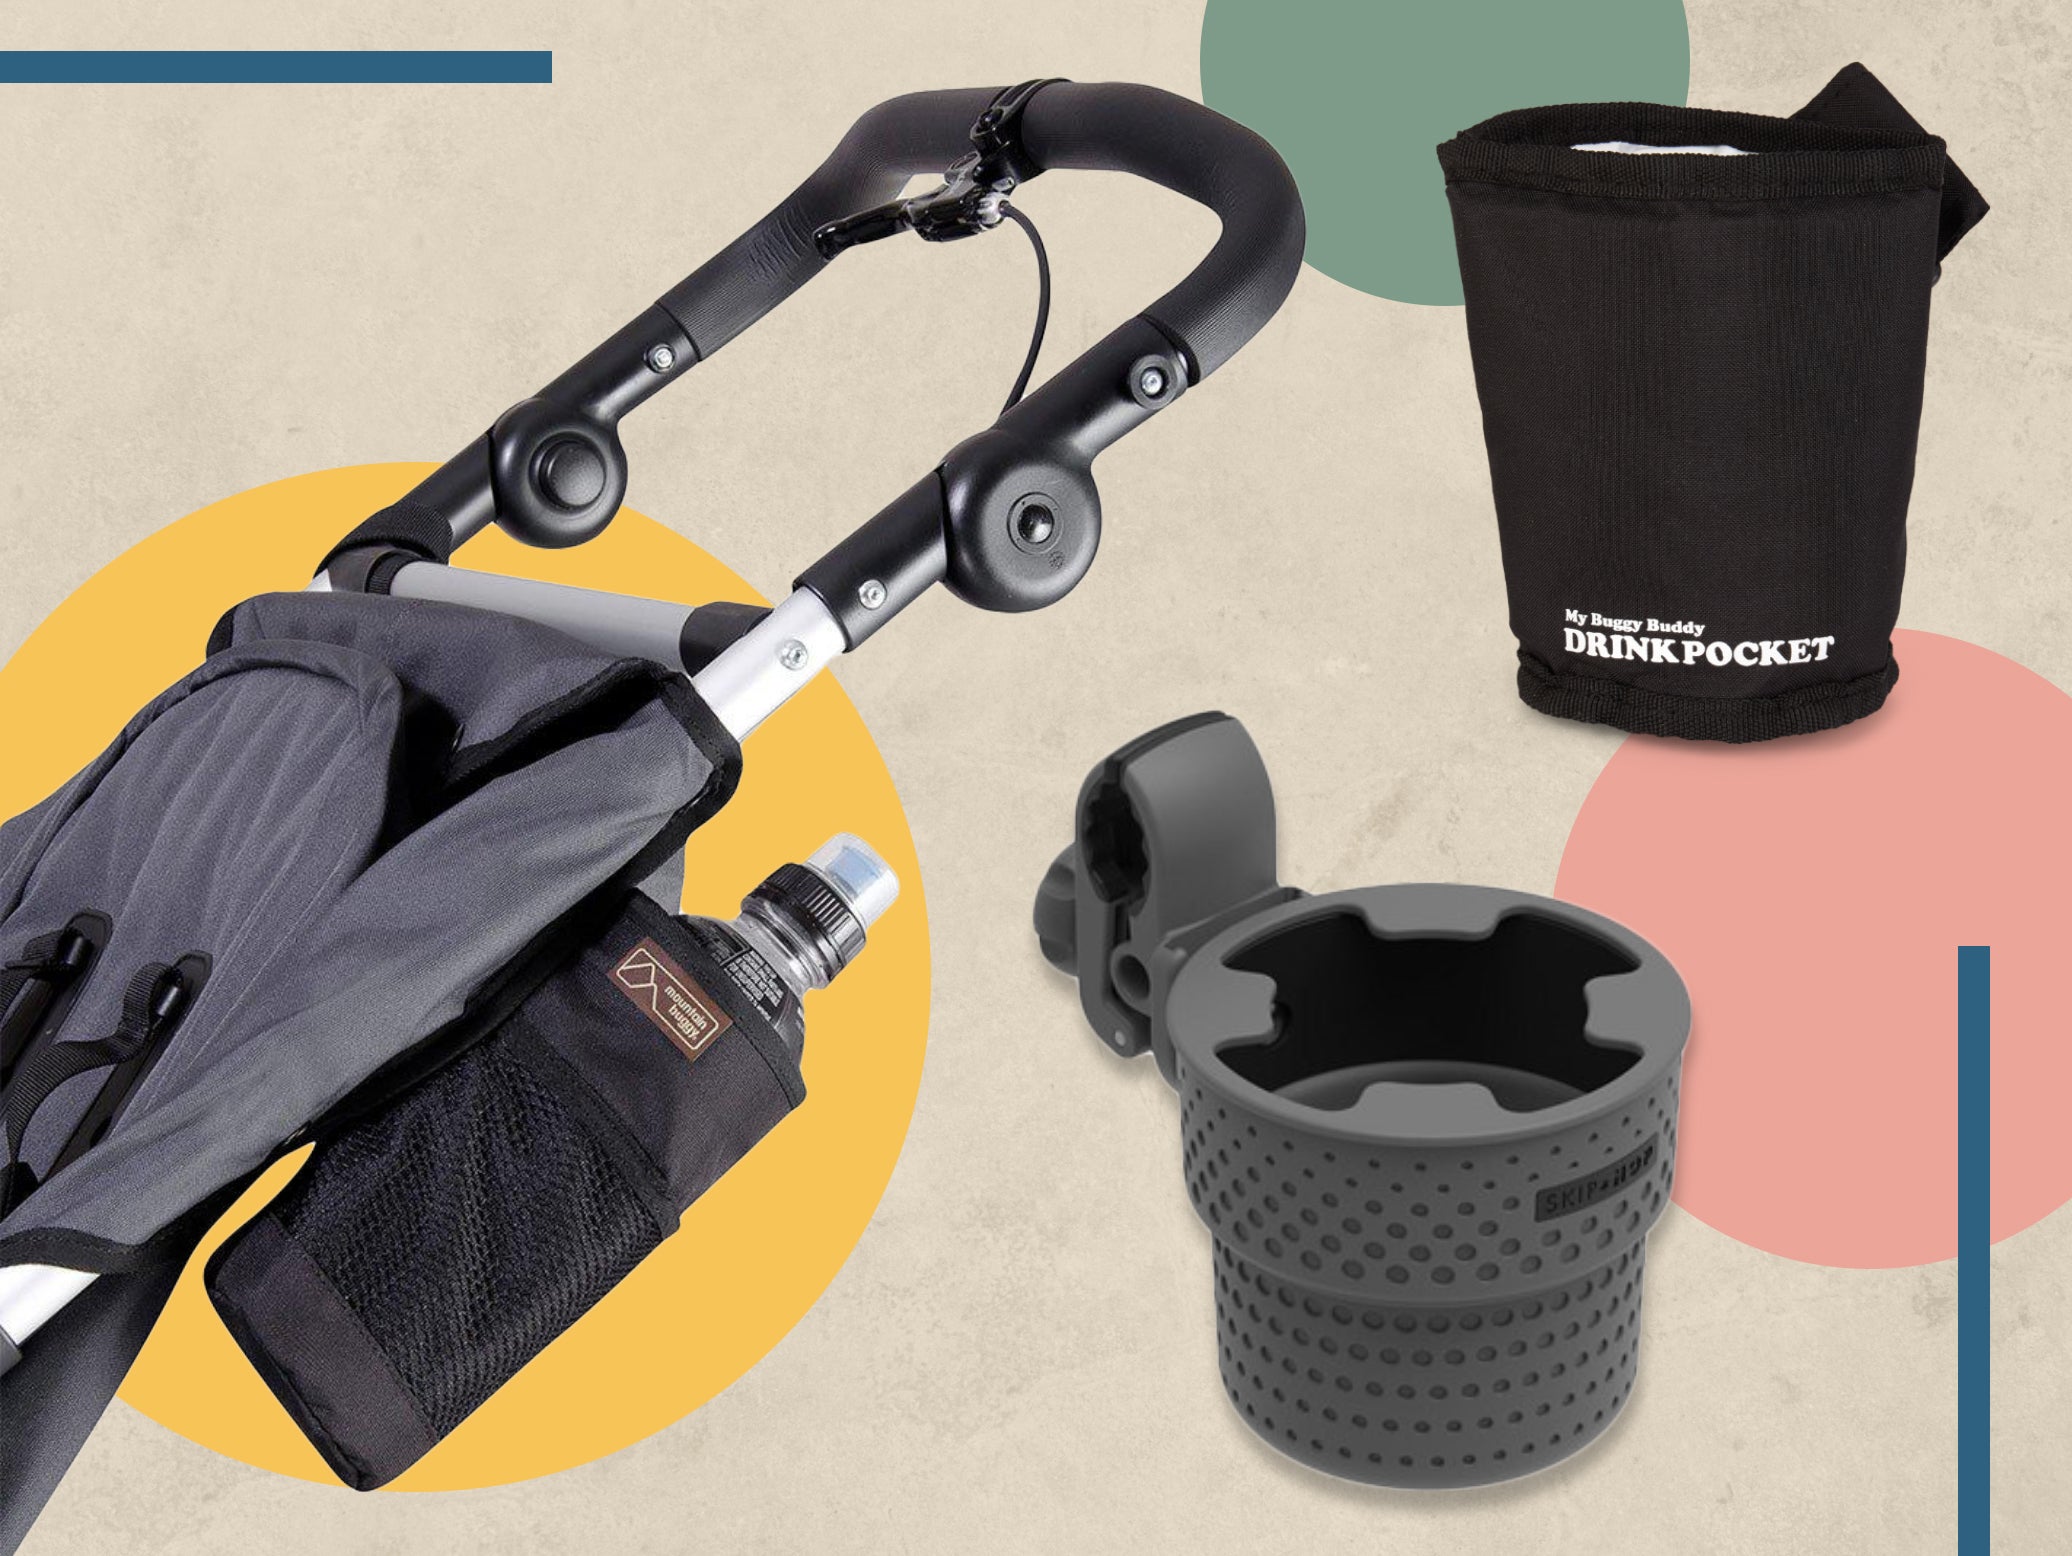 https://static.independent.co.uk/2022/01/19/17/pushchair%20cups%20indybest%20copy.jpg